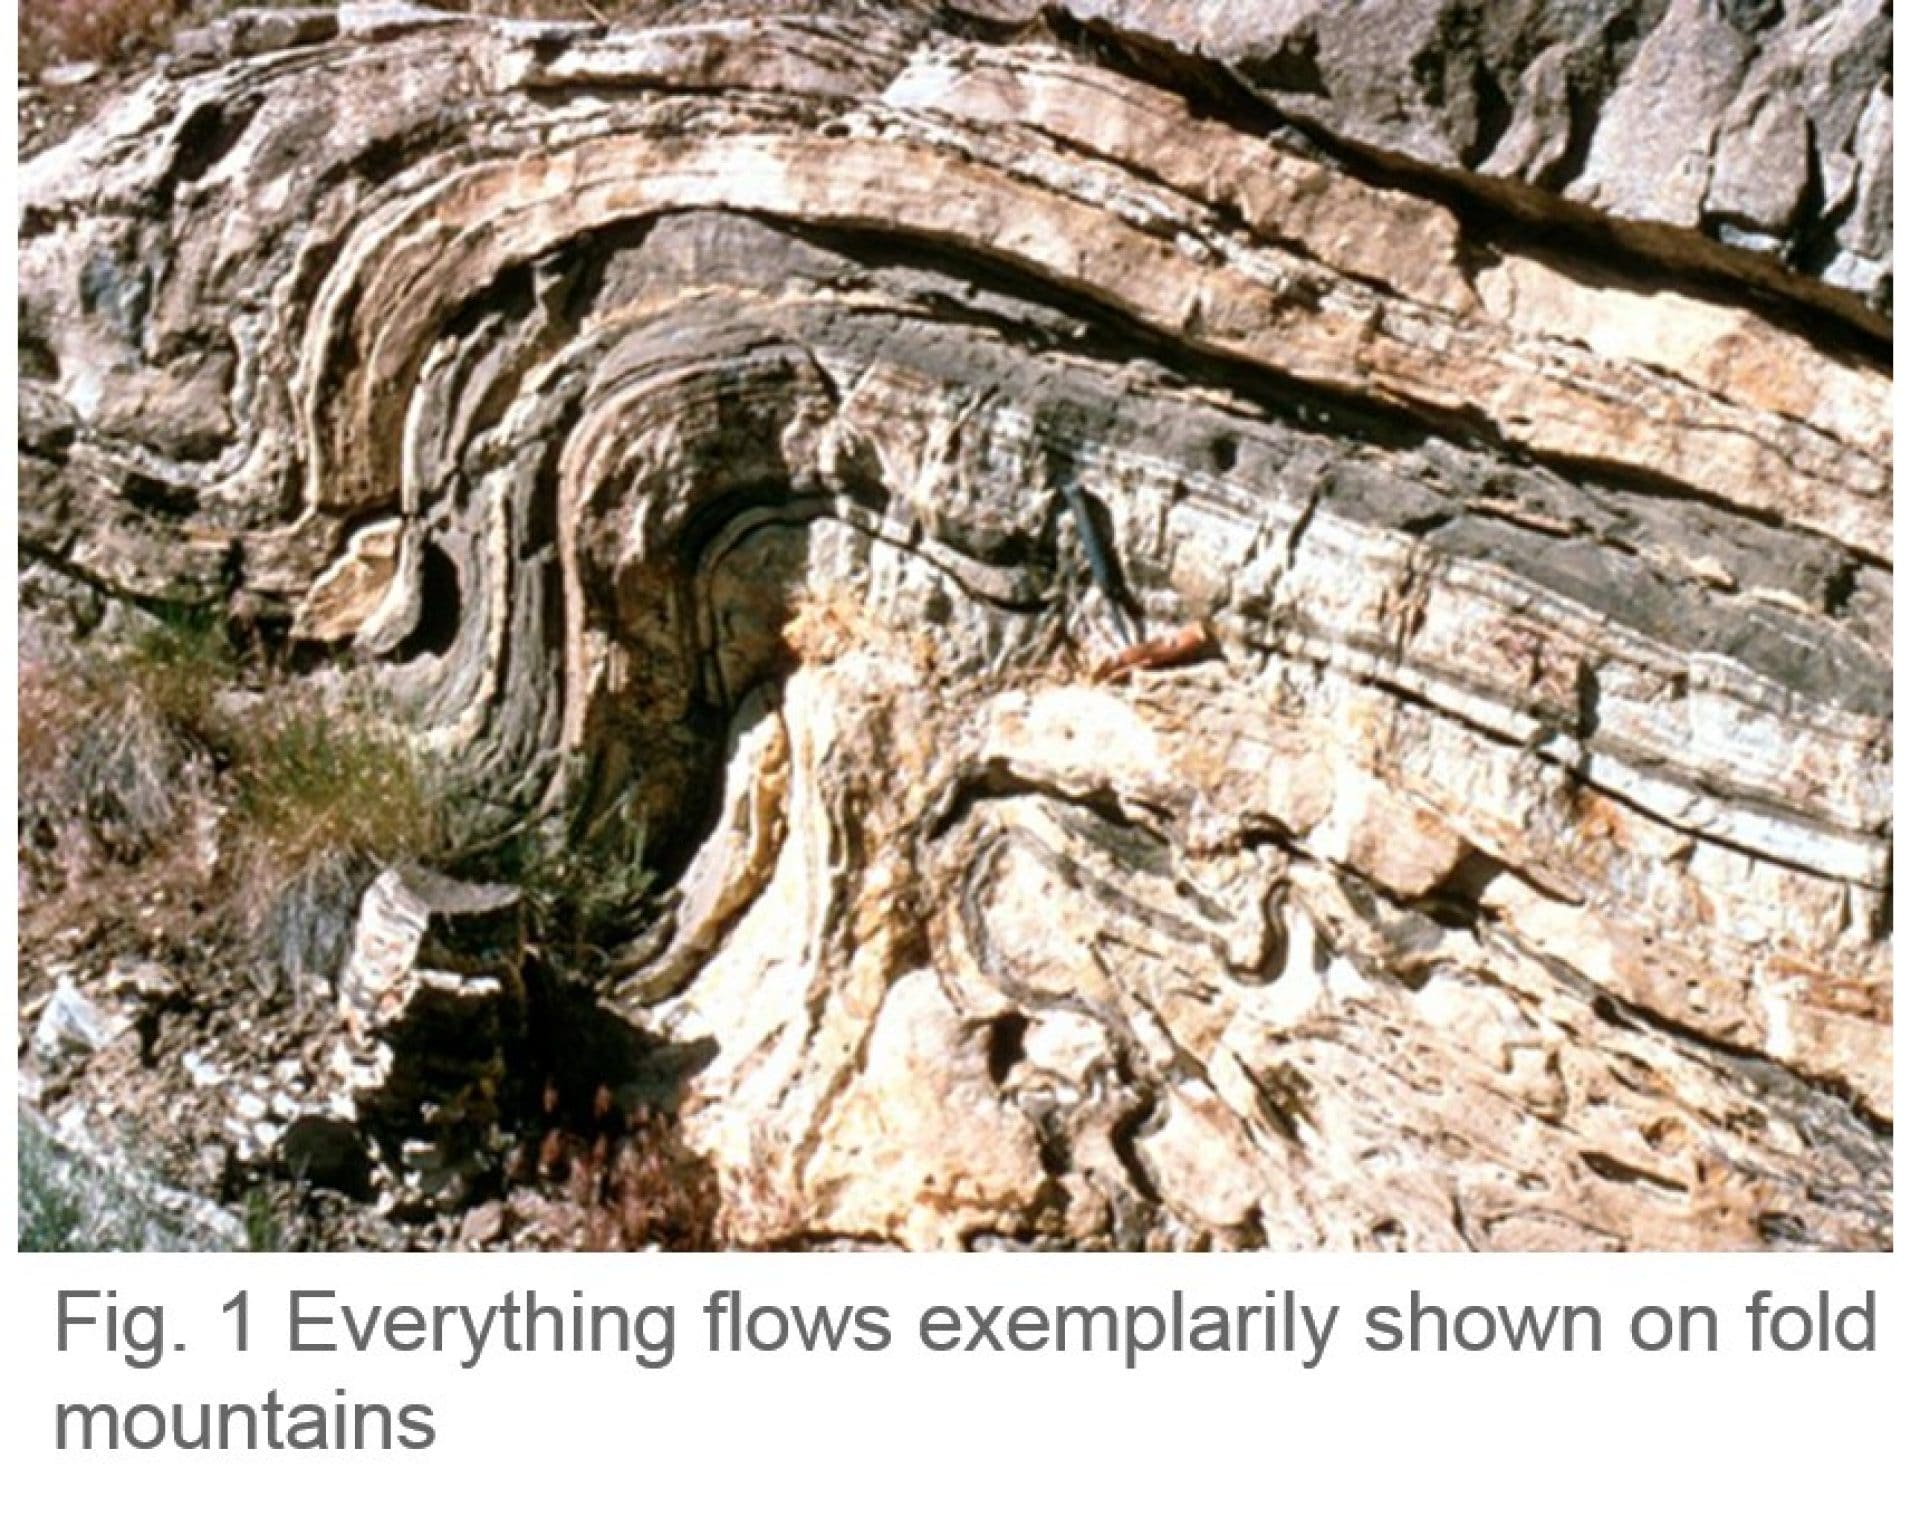 Fig. 1 Everything flows exemplarily shown on fold mountains